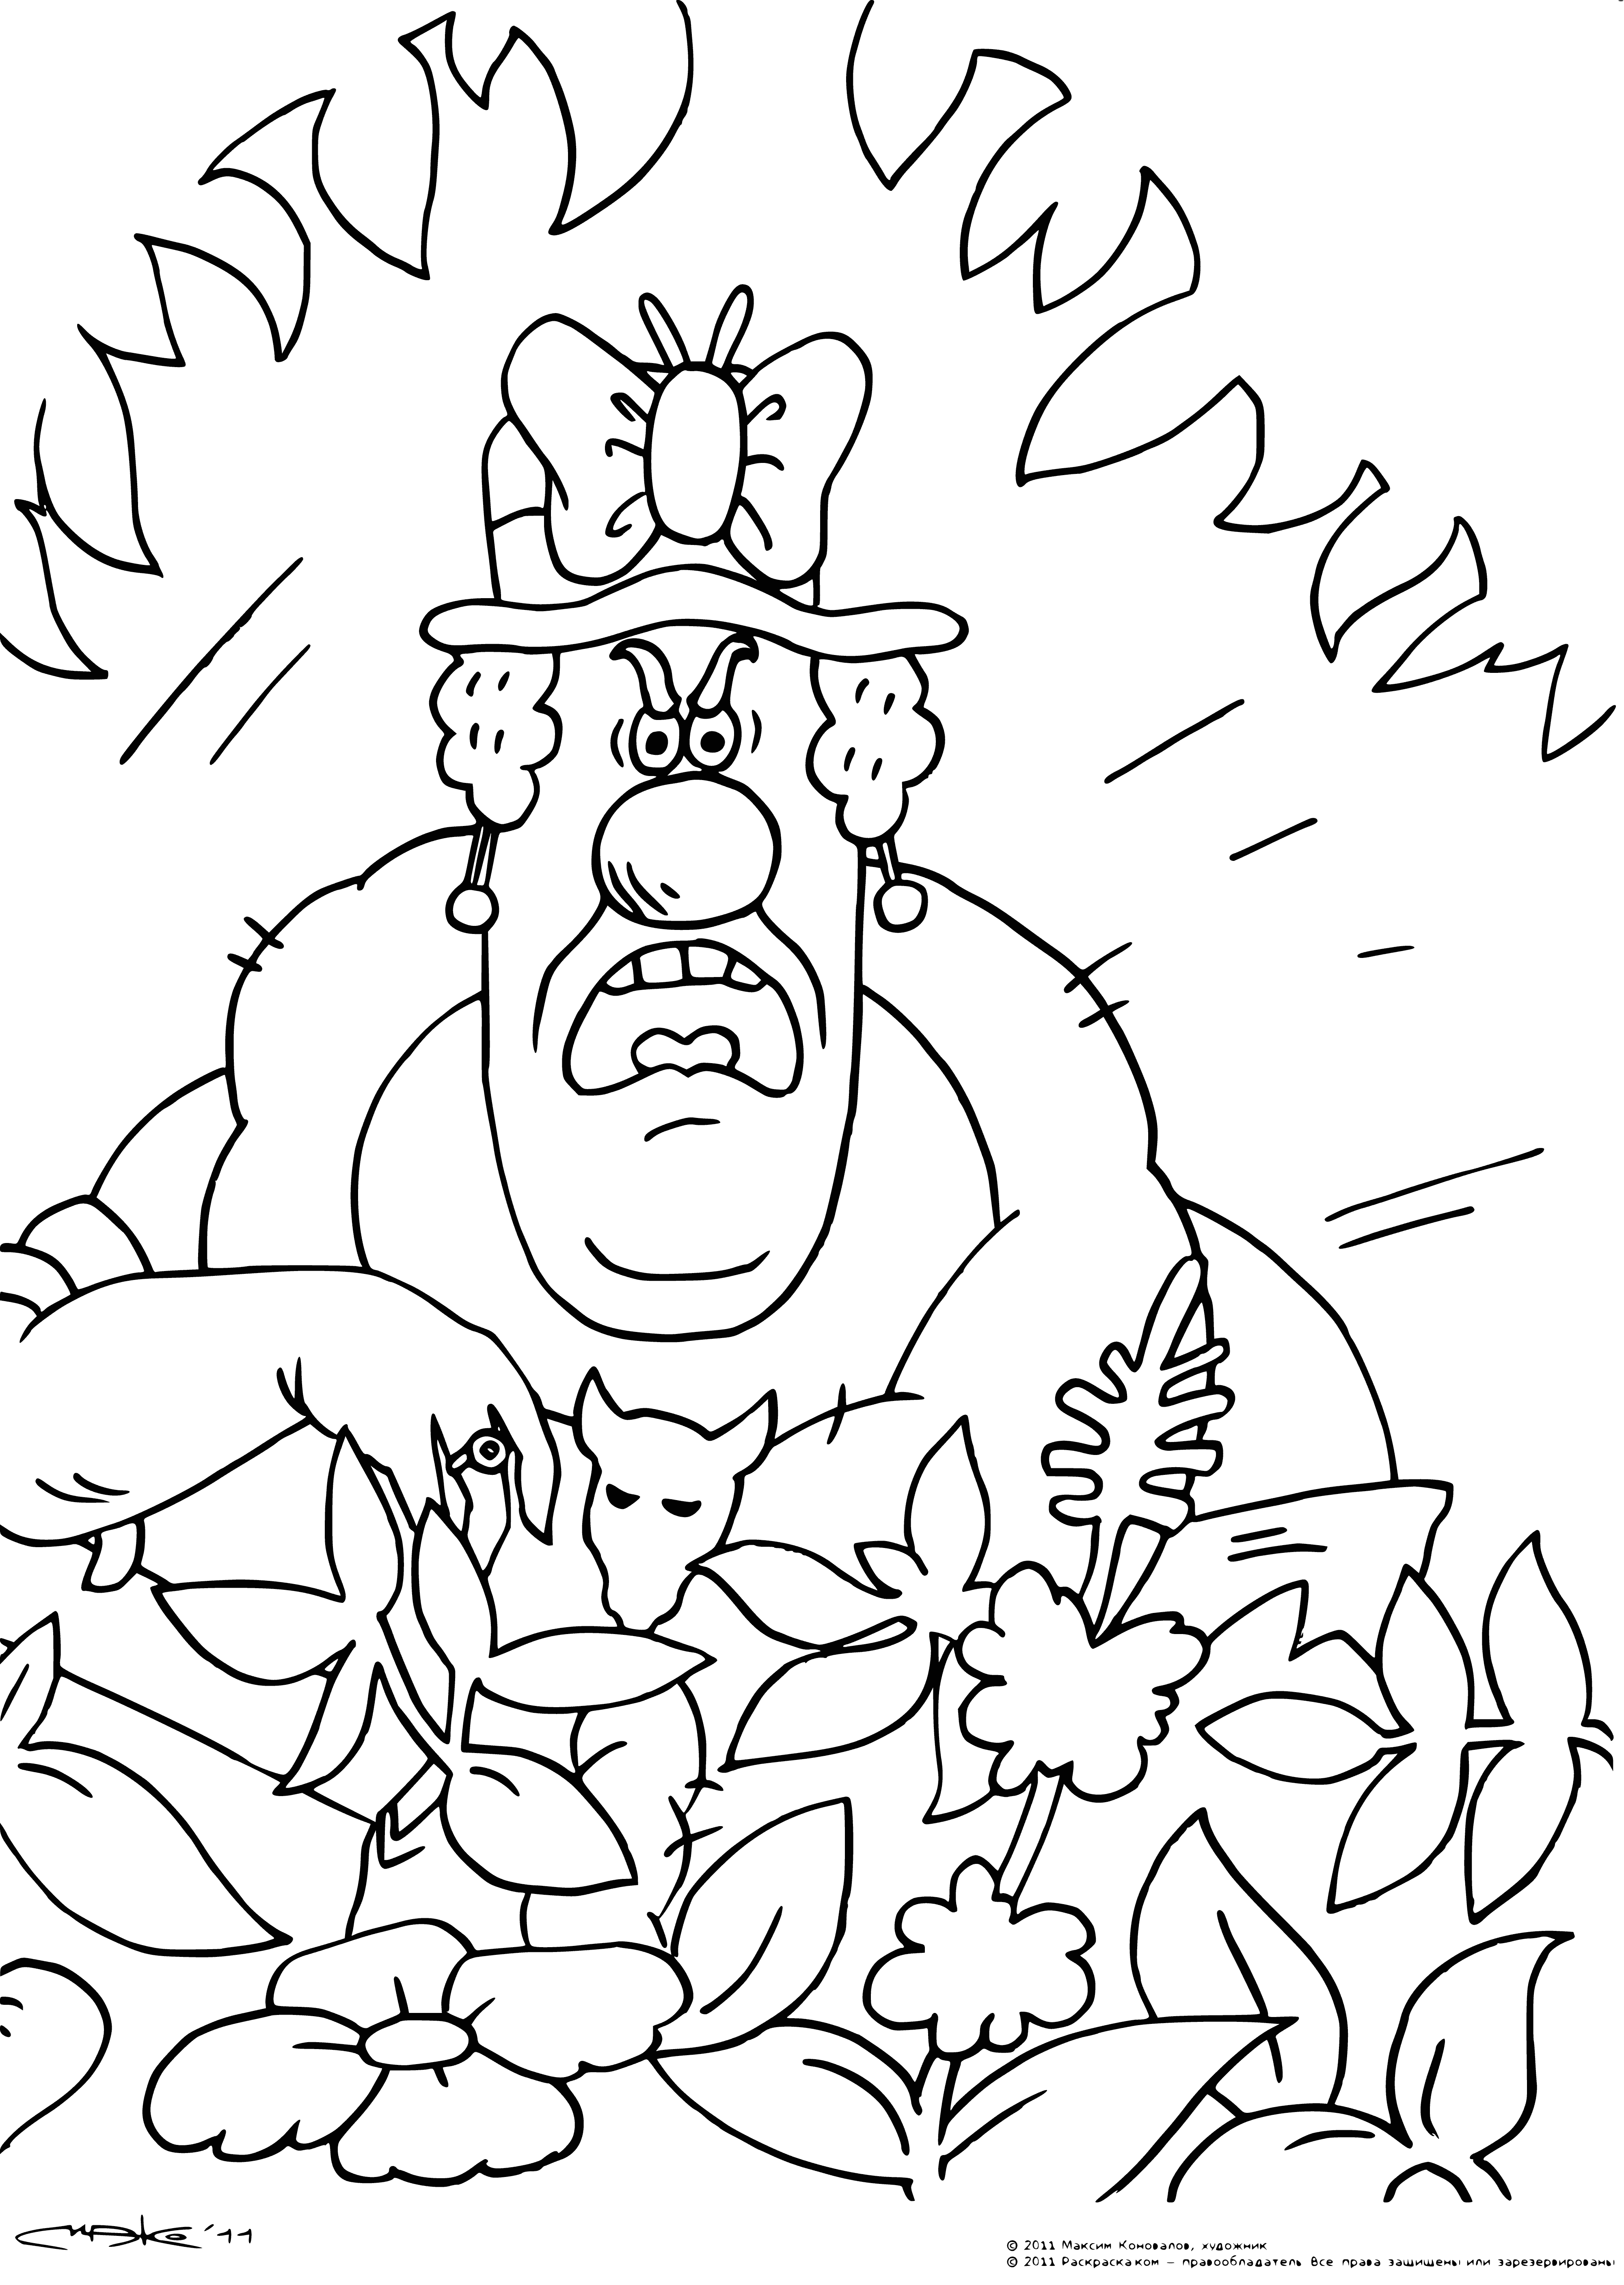 coloring page: Funtik the pig is hiding in the forest with a branch, ready to ambush any other animals that come by.